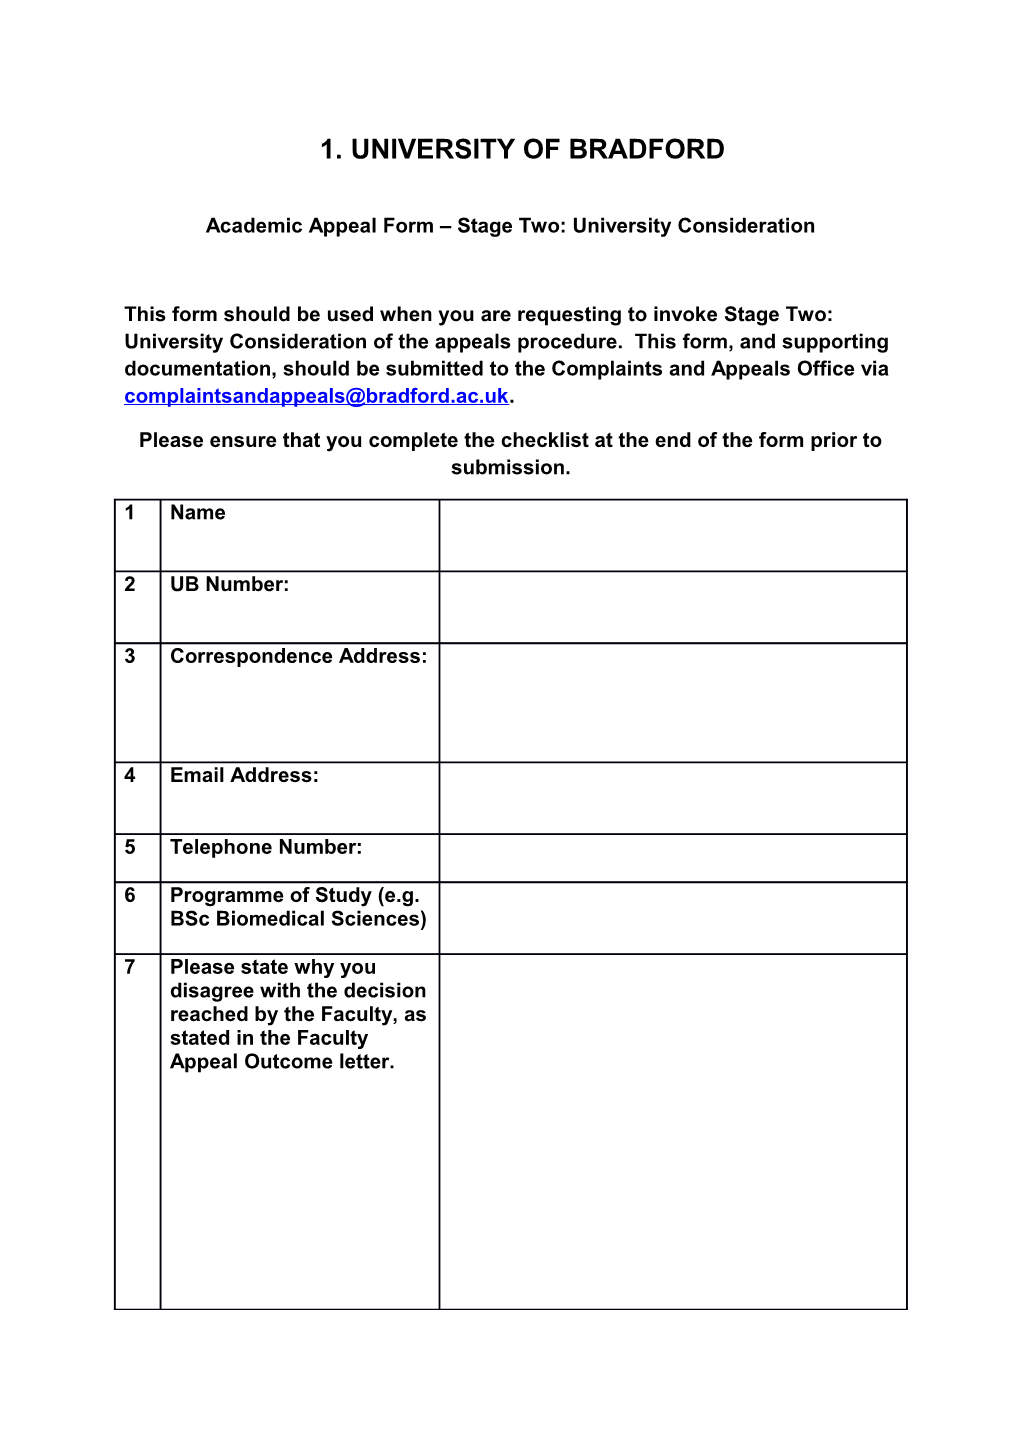 Academic Appeal Form Stage Two: University Consideration